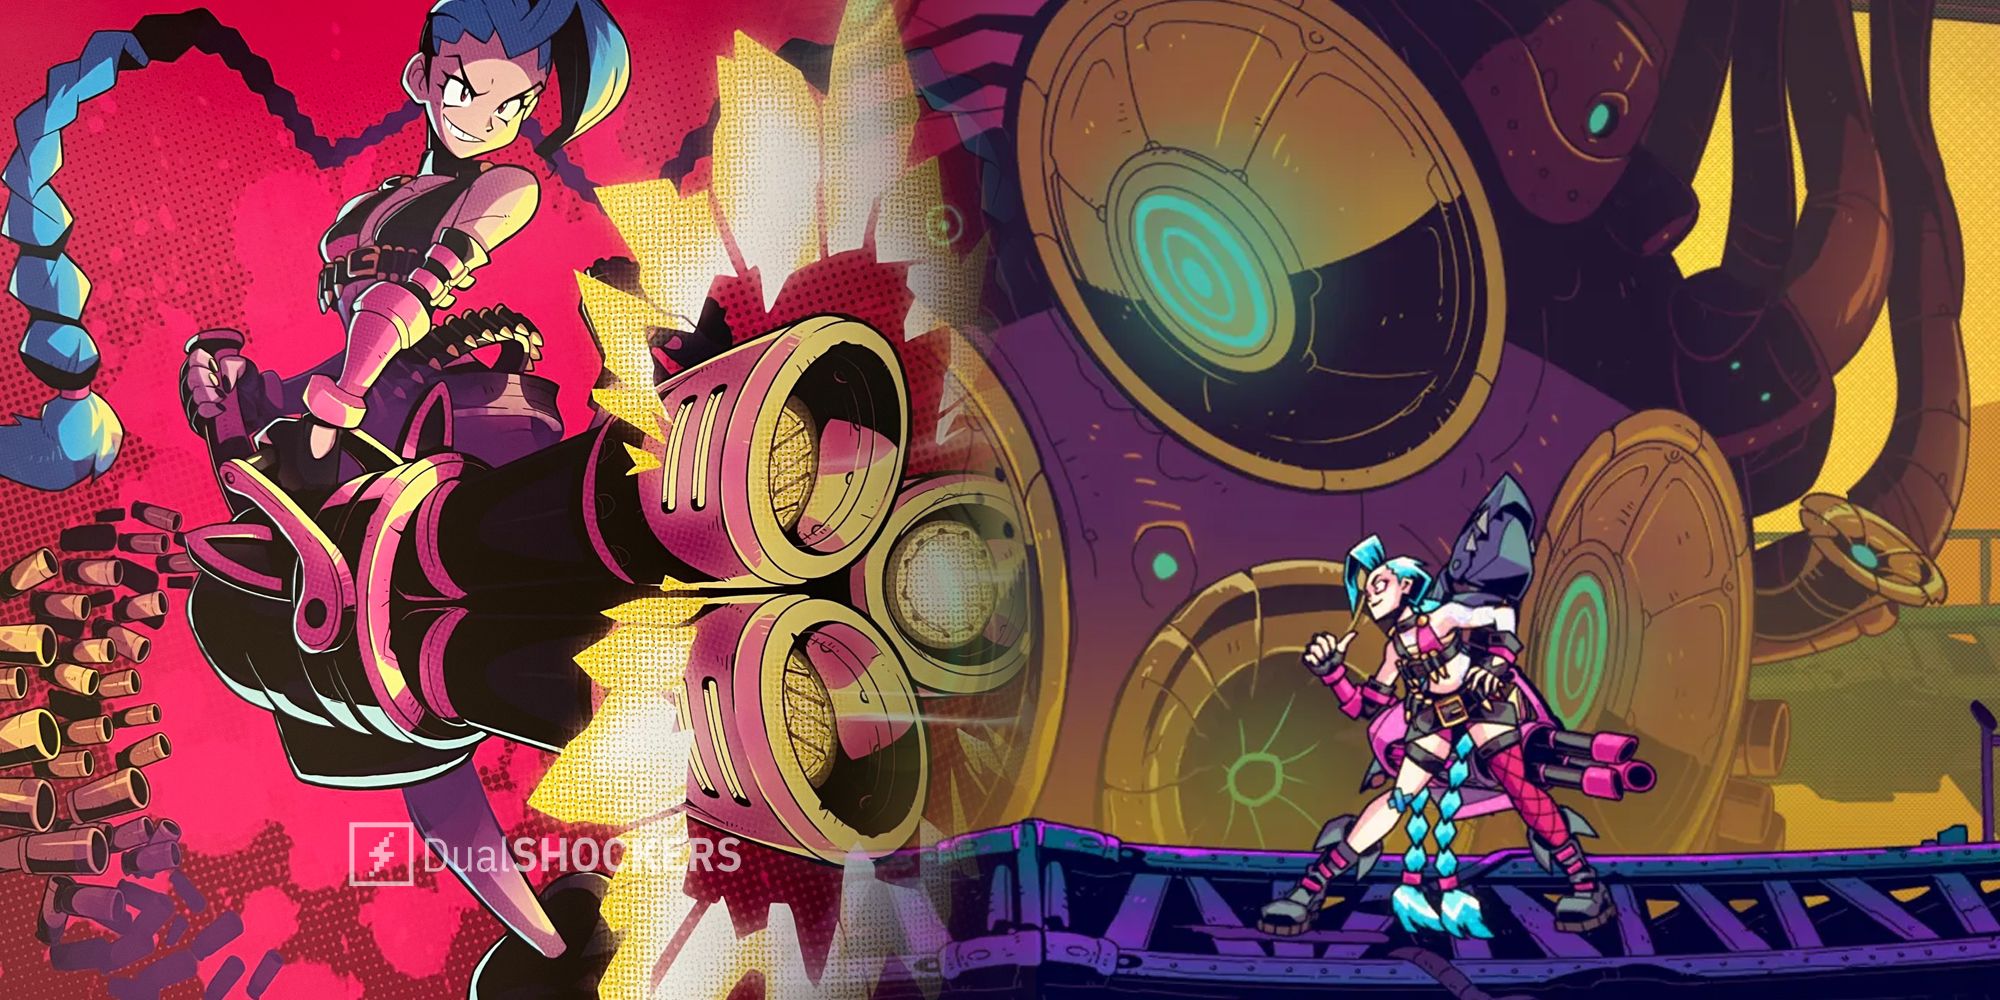 Convergence Jinx boss fight gameplay and promo art